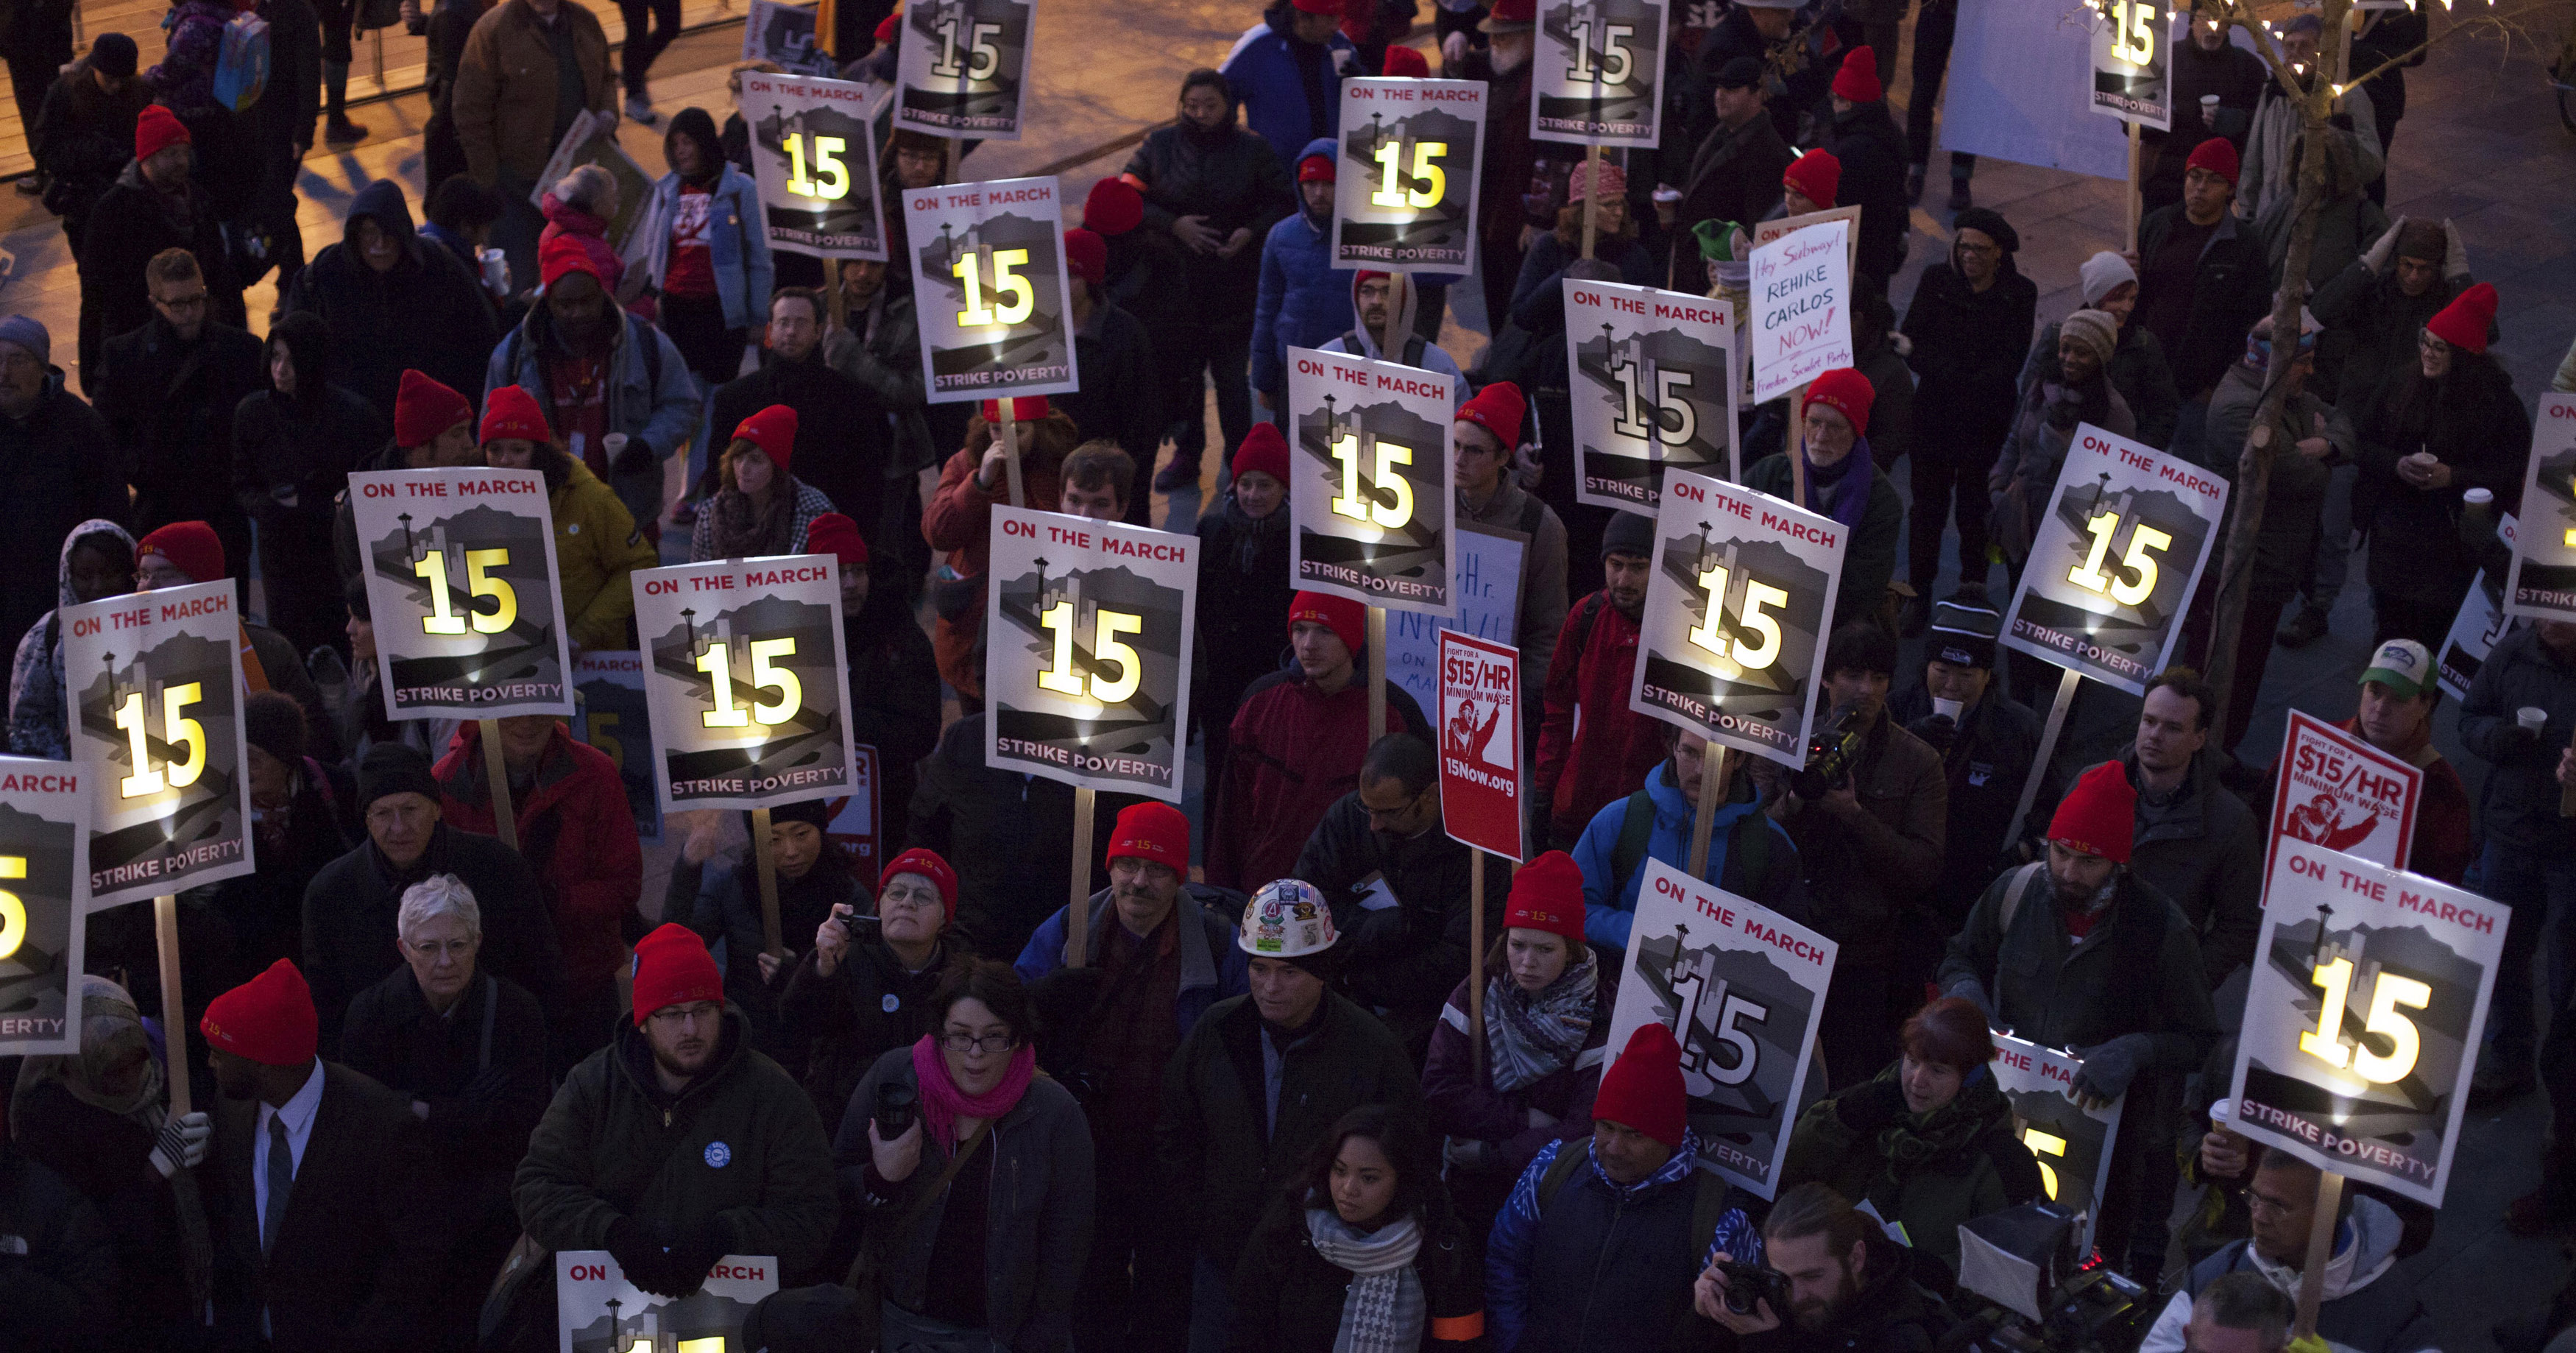 Demonstrators rally to raise the hourly minimum wage to US$15 for fast-food workers.